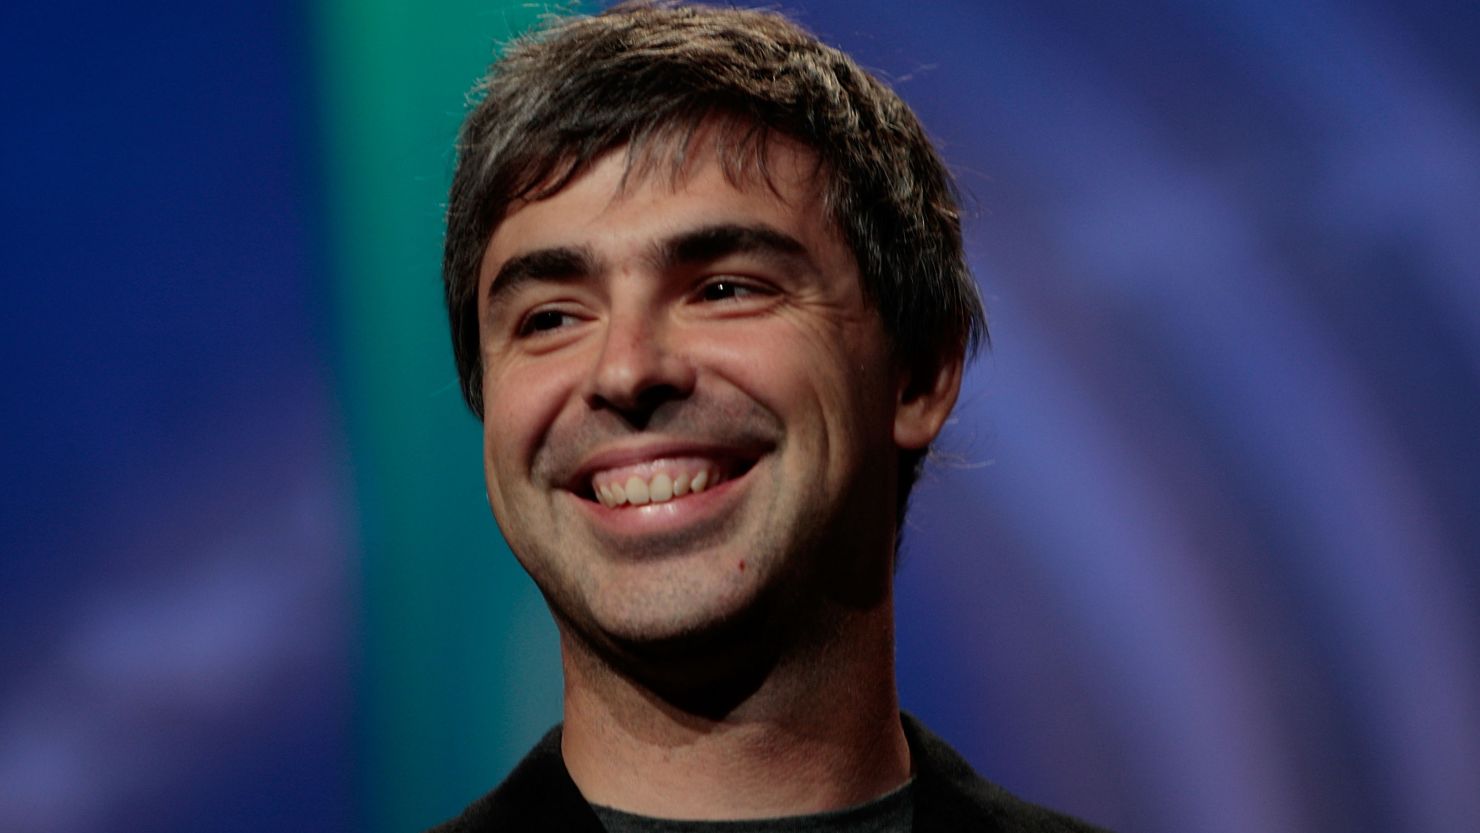 Google CEO Larry Page has been a no-show at multiple recent company events.